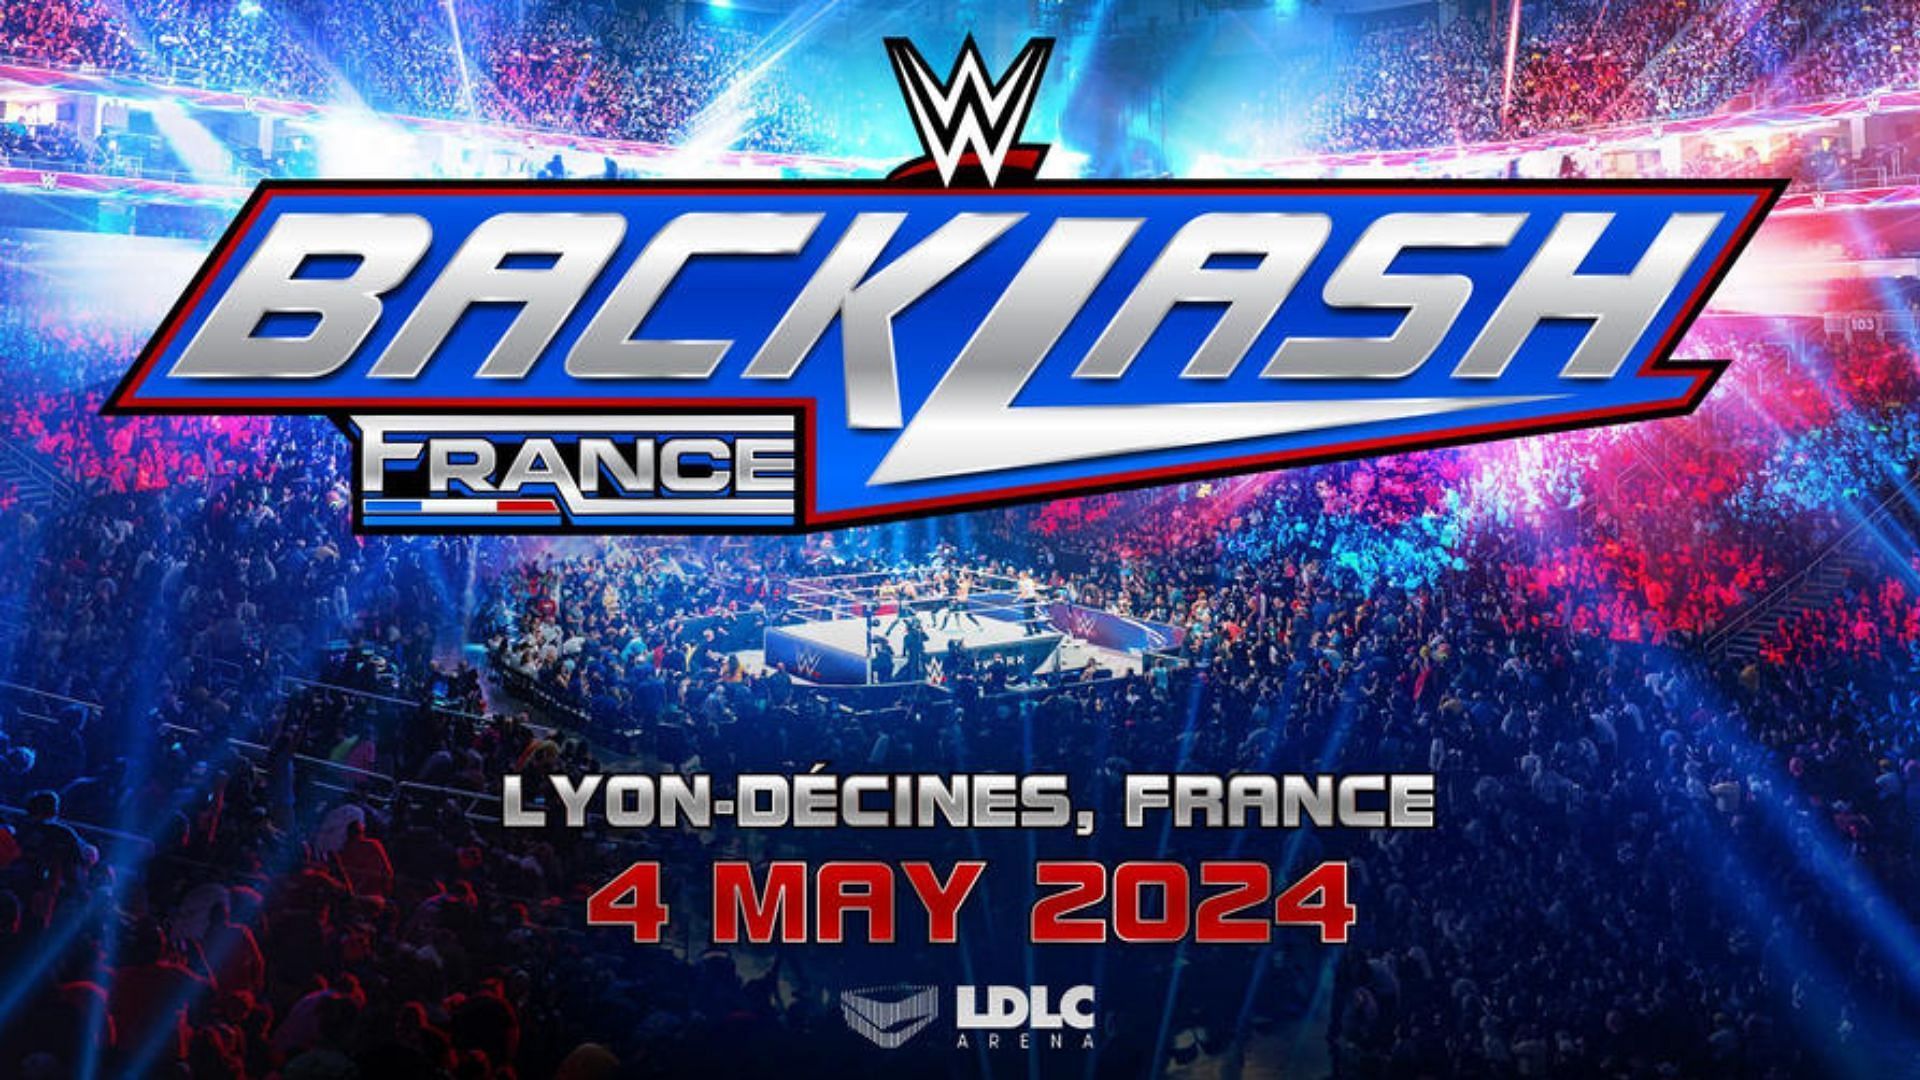 WWE has had some notable French wrestlers in the past.